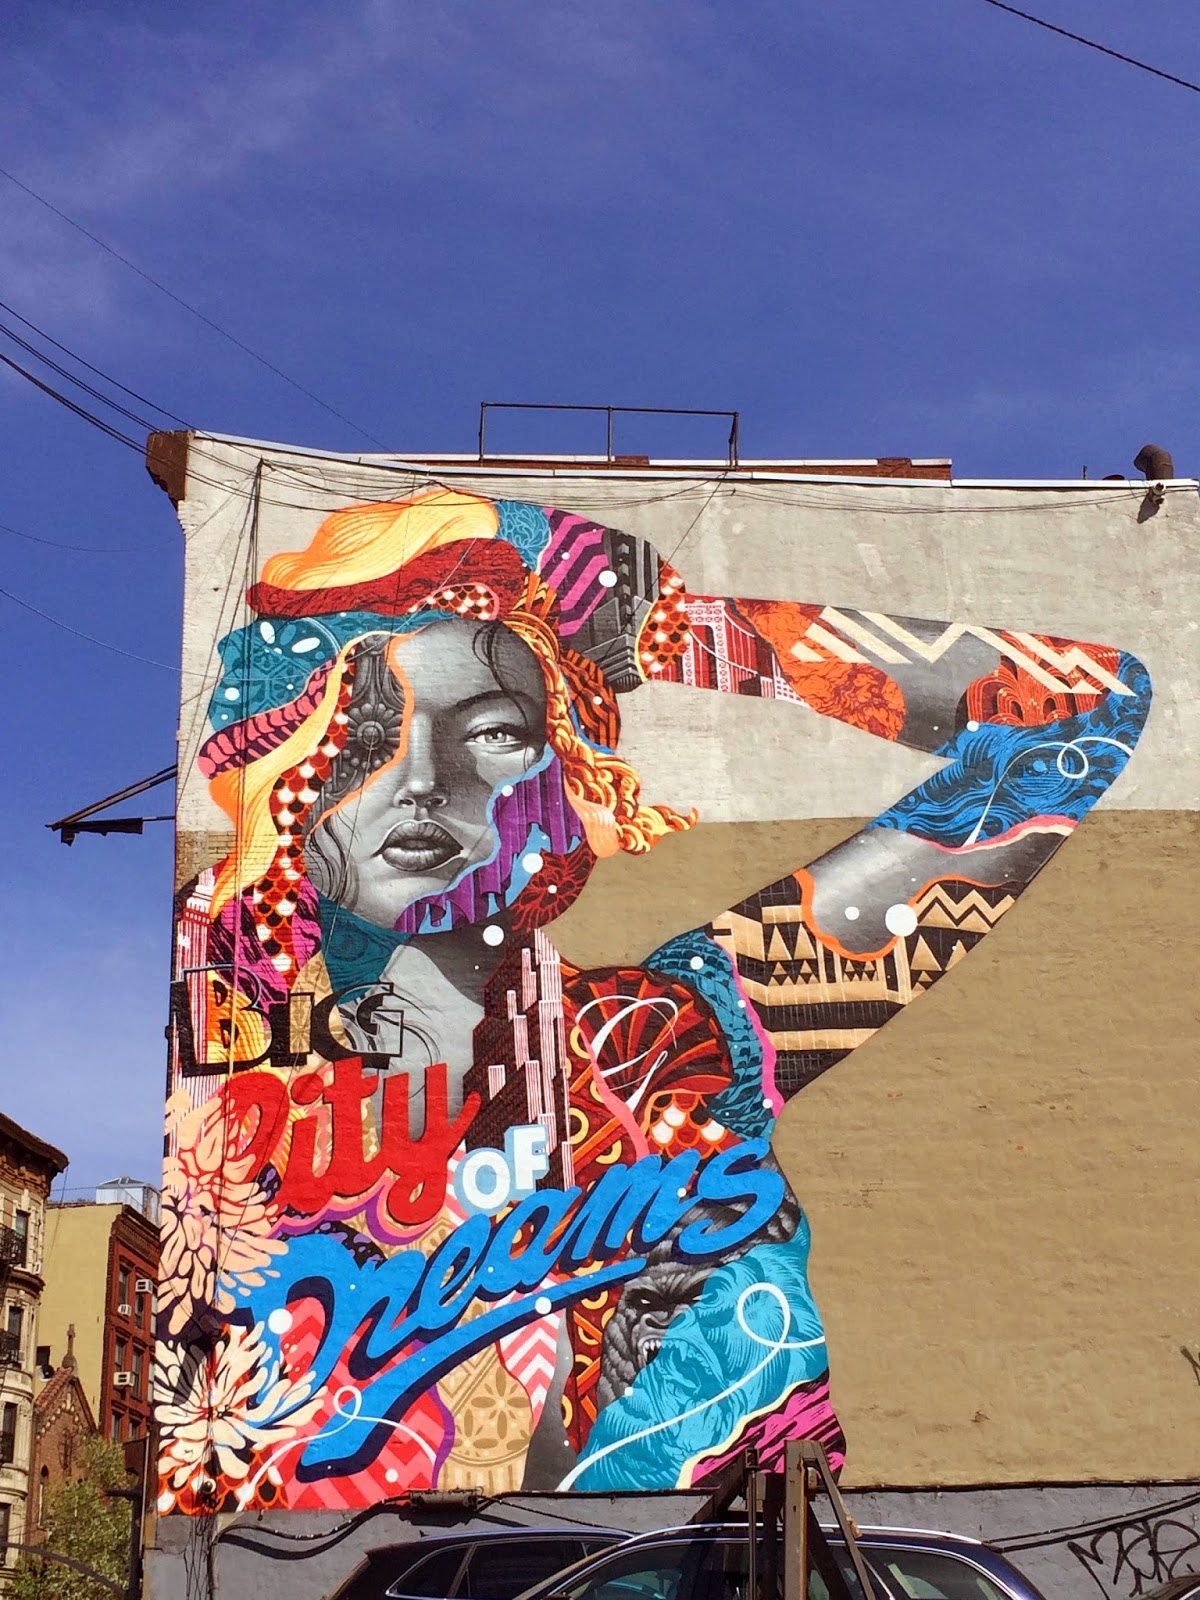 Tristan Eaton unveils "Big City Dreams" his newest mural in New York